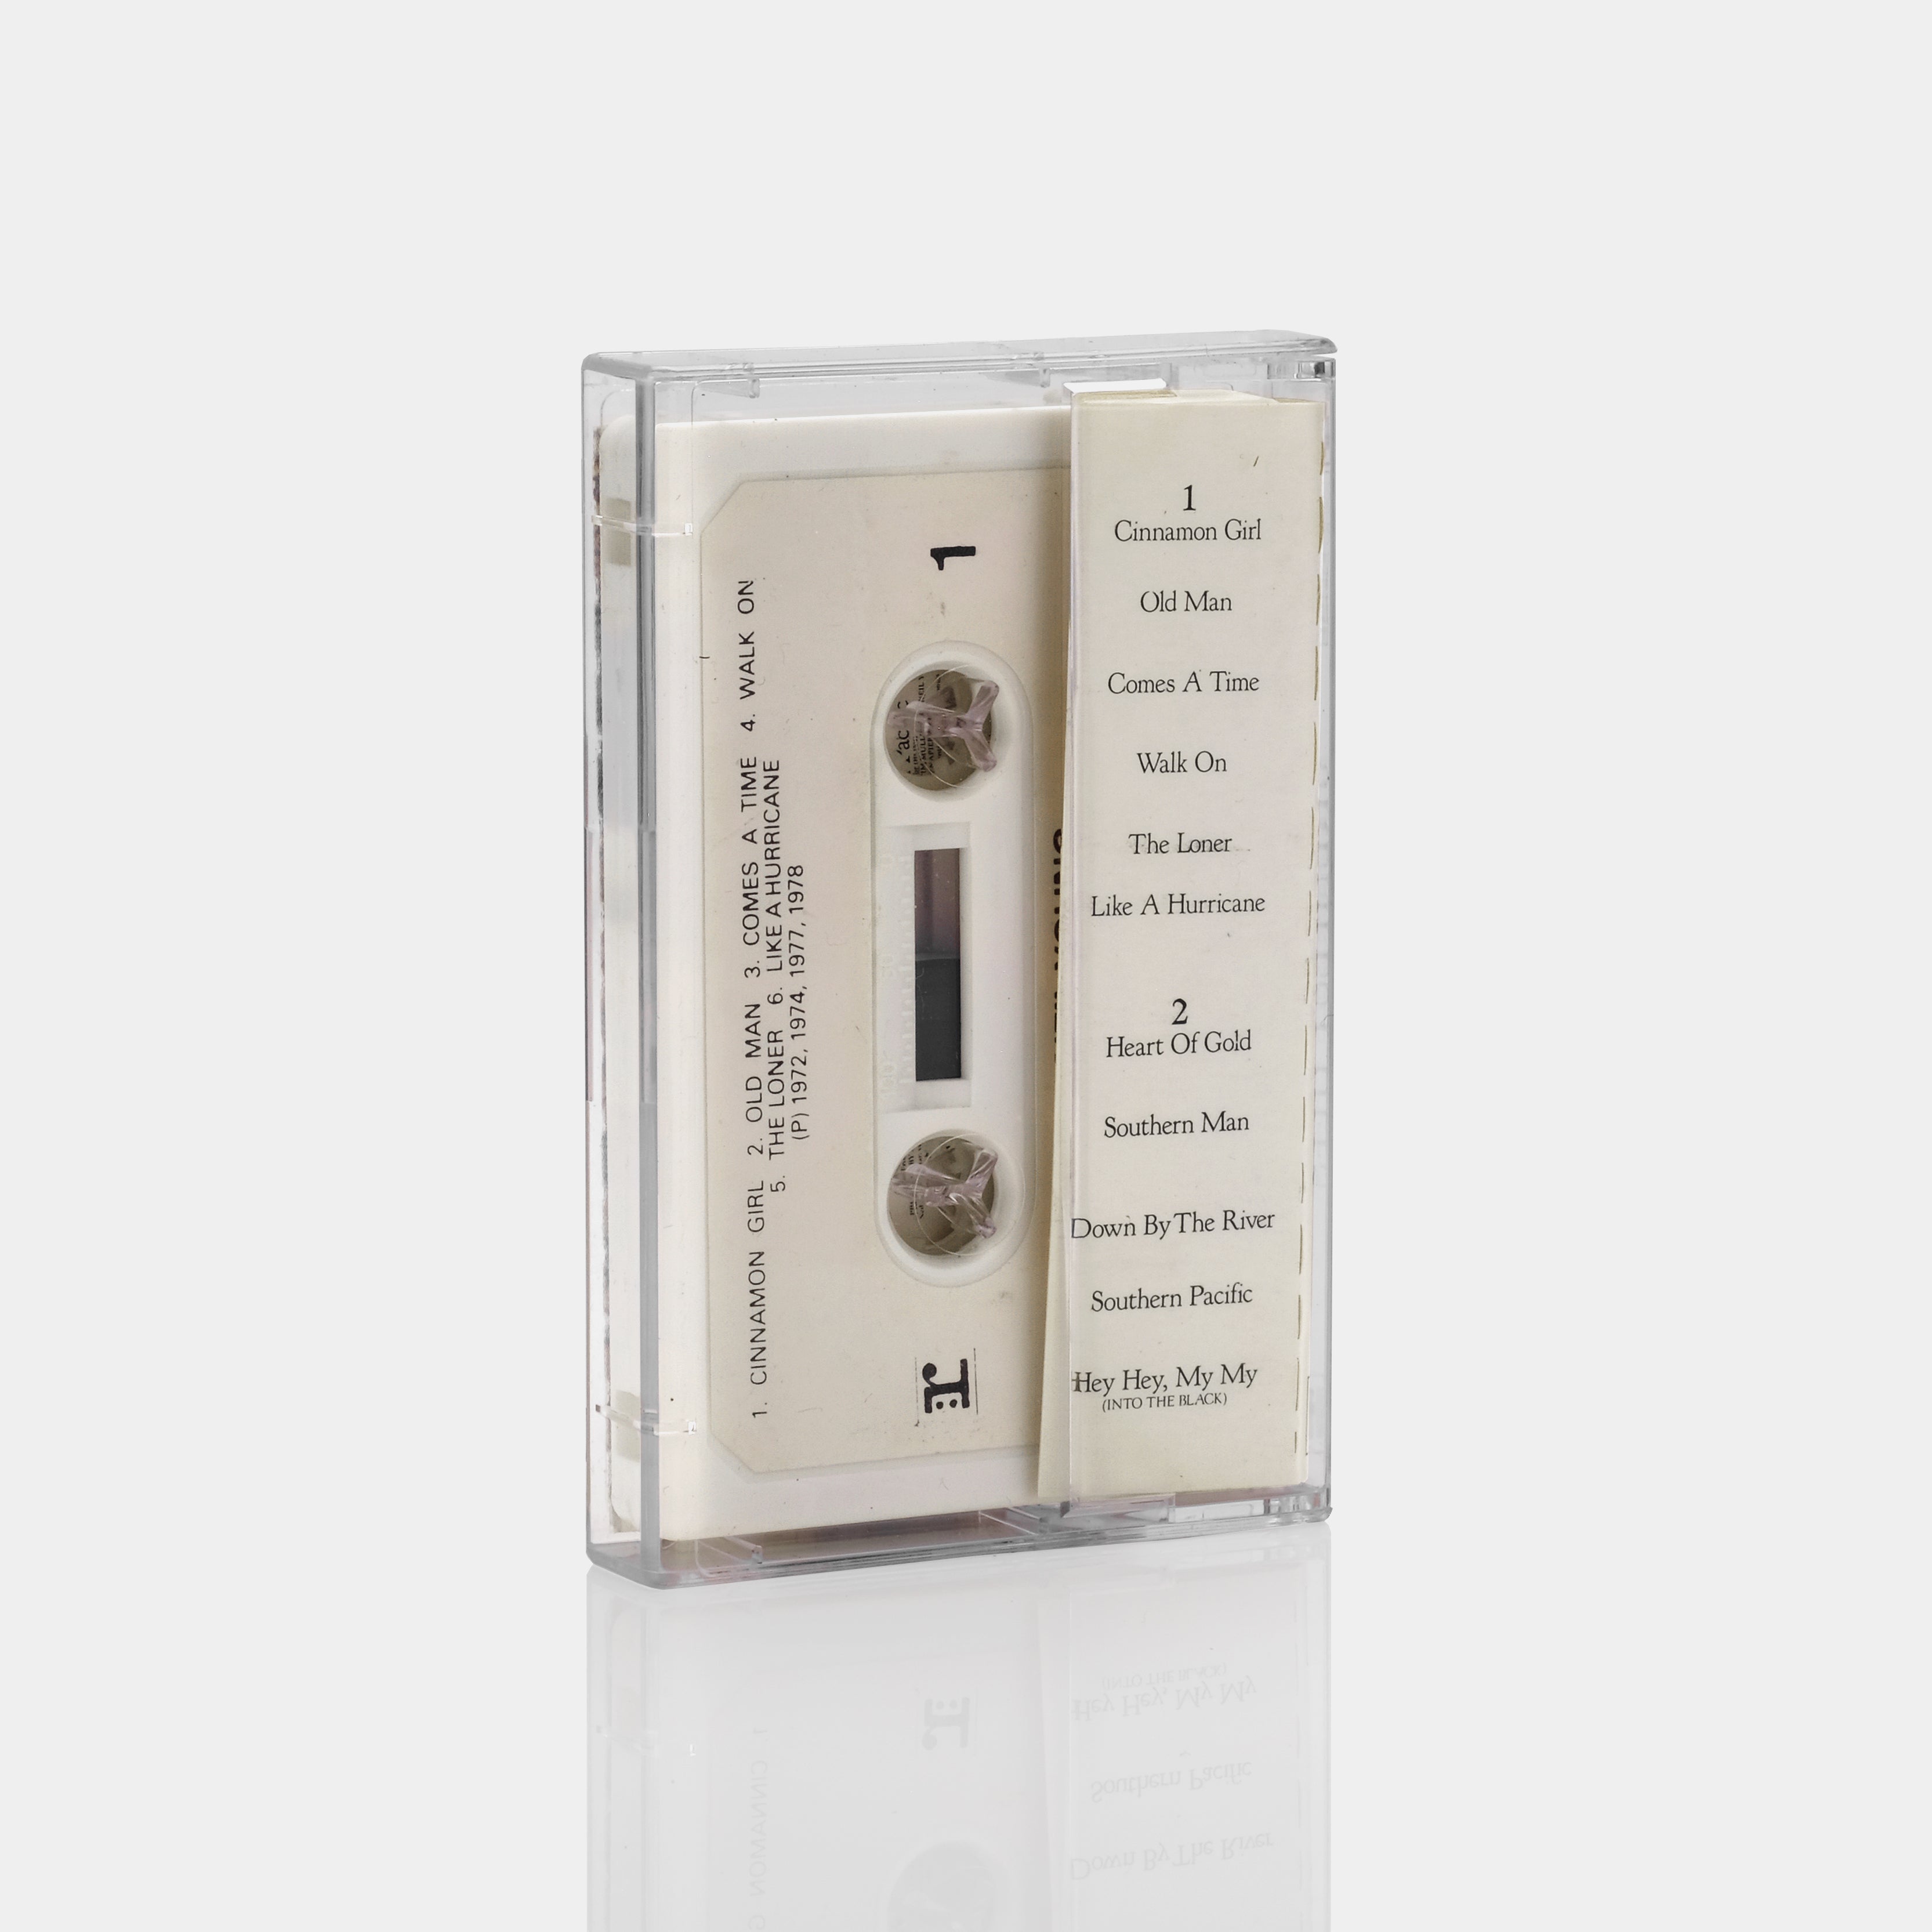 Neil Young - Greatest Hits Cassette Tape